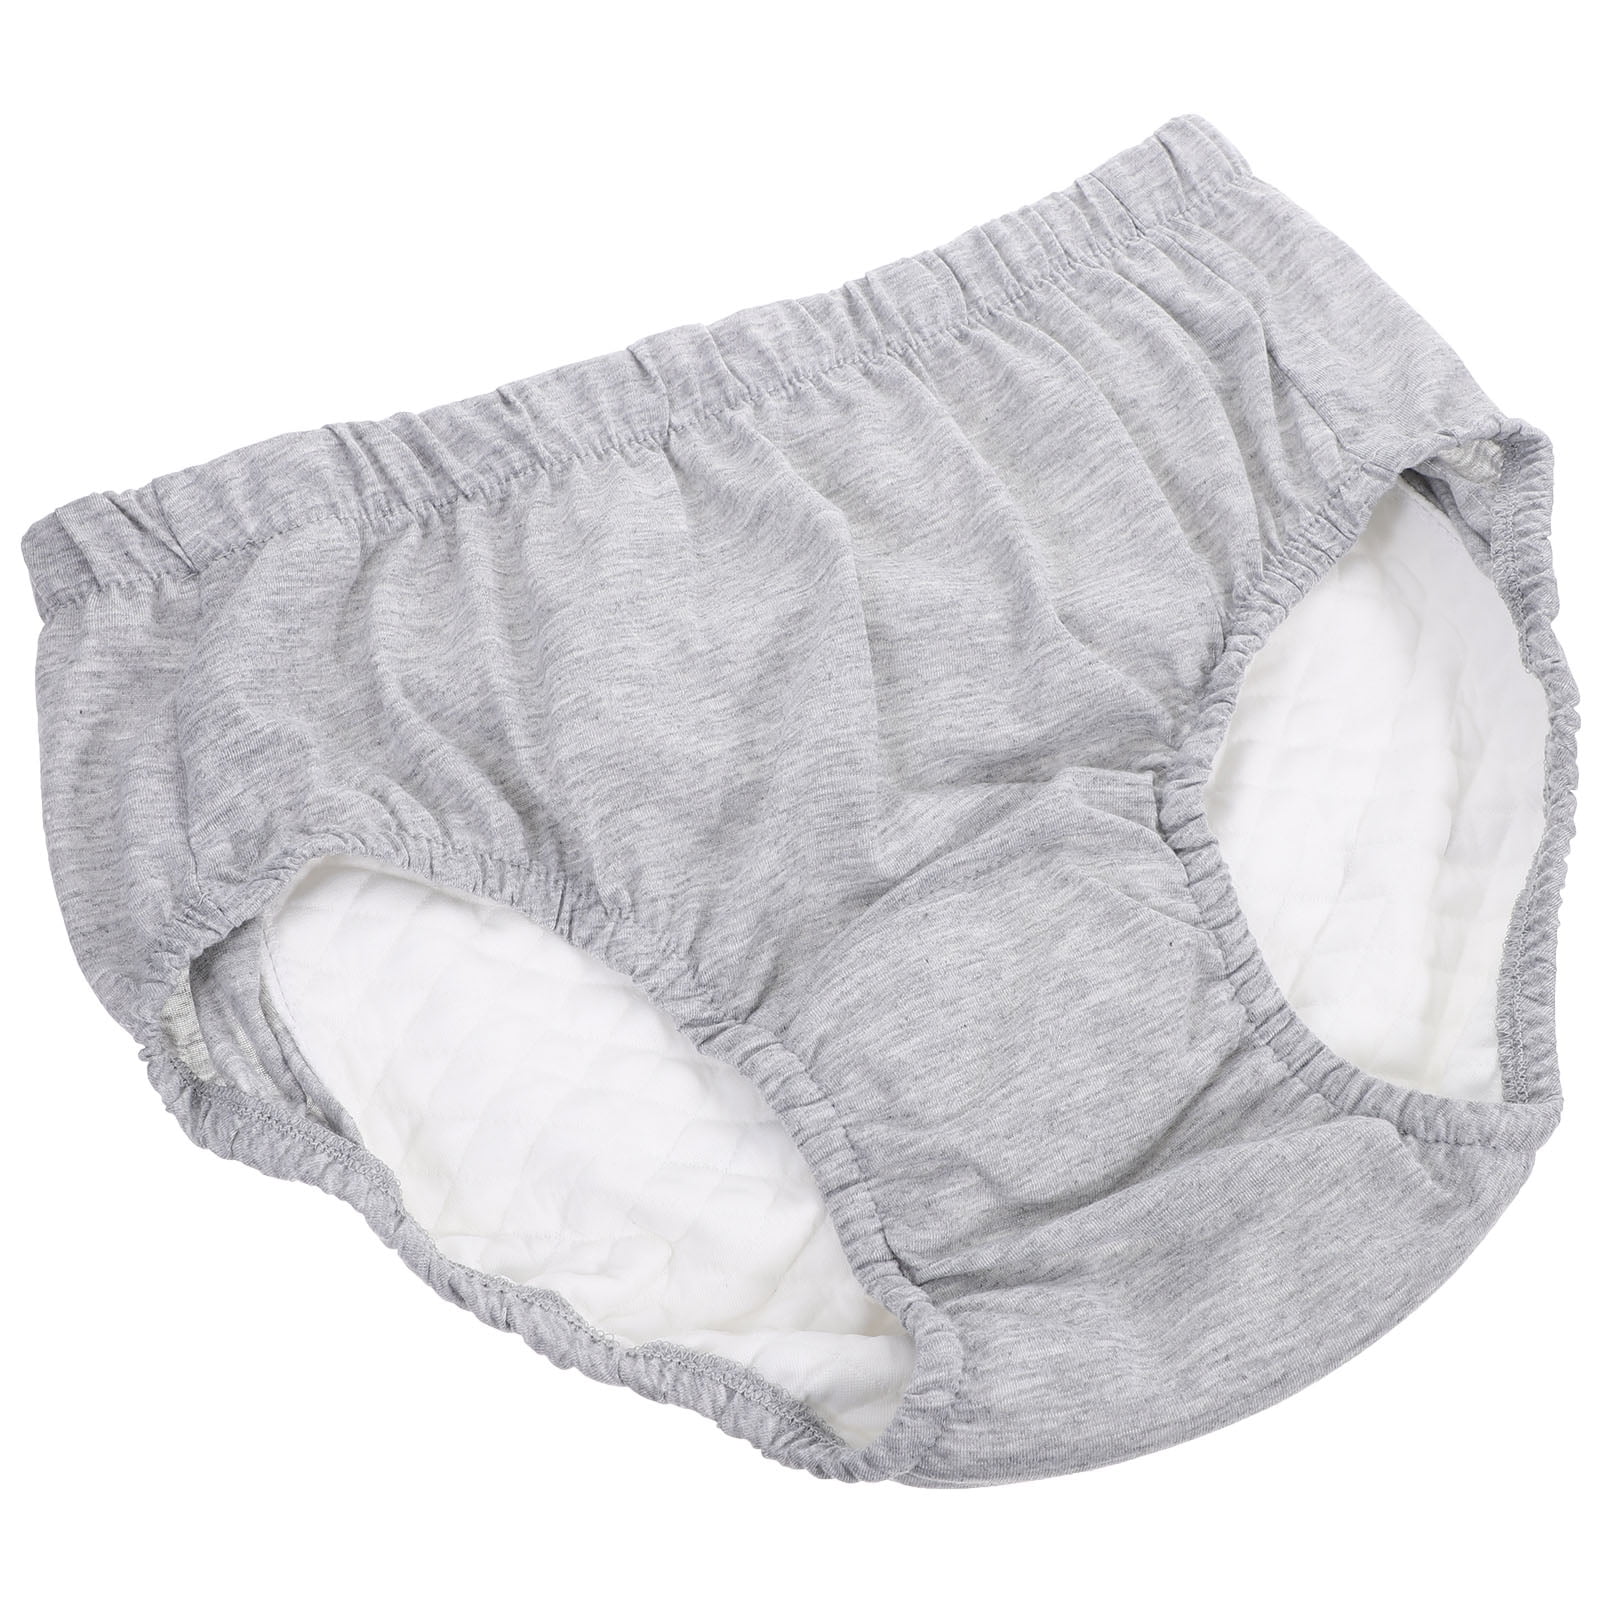 Diaper Adult Pants Diapers Incontinence Reusable Underwear Cloth Old  Disposable Washable Briefs Nappy Wraps Disabled 